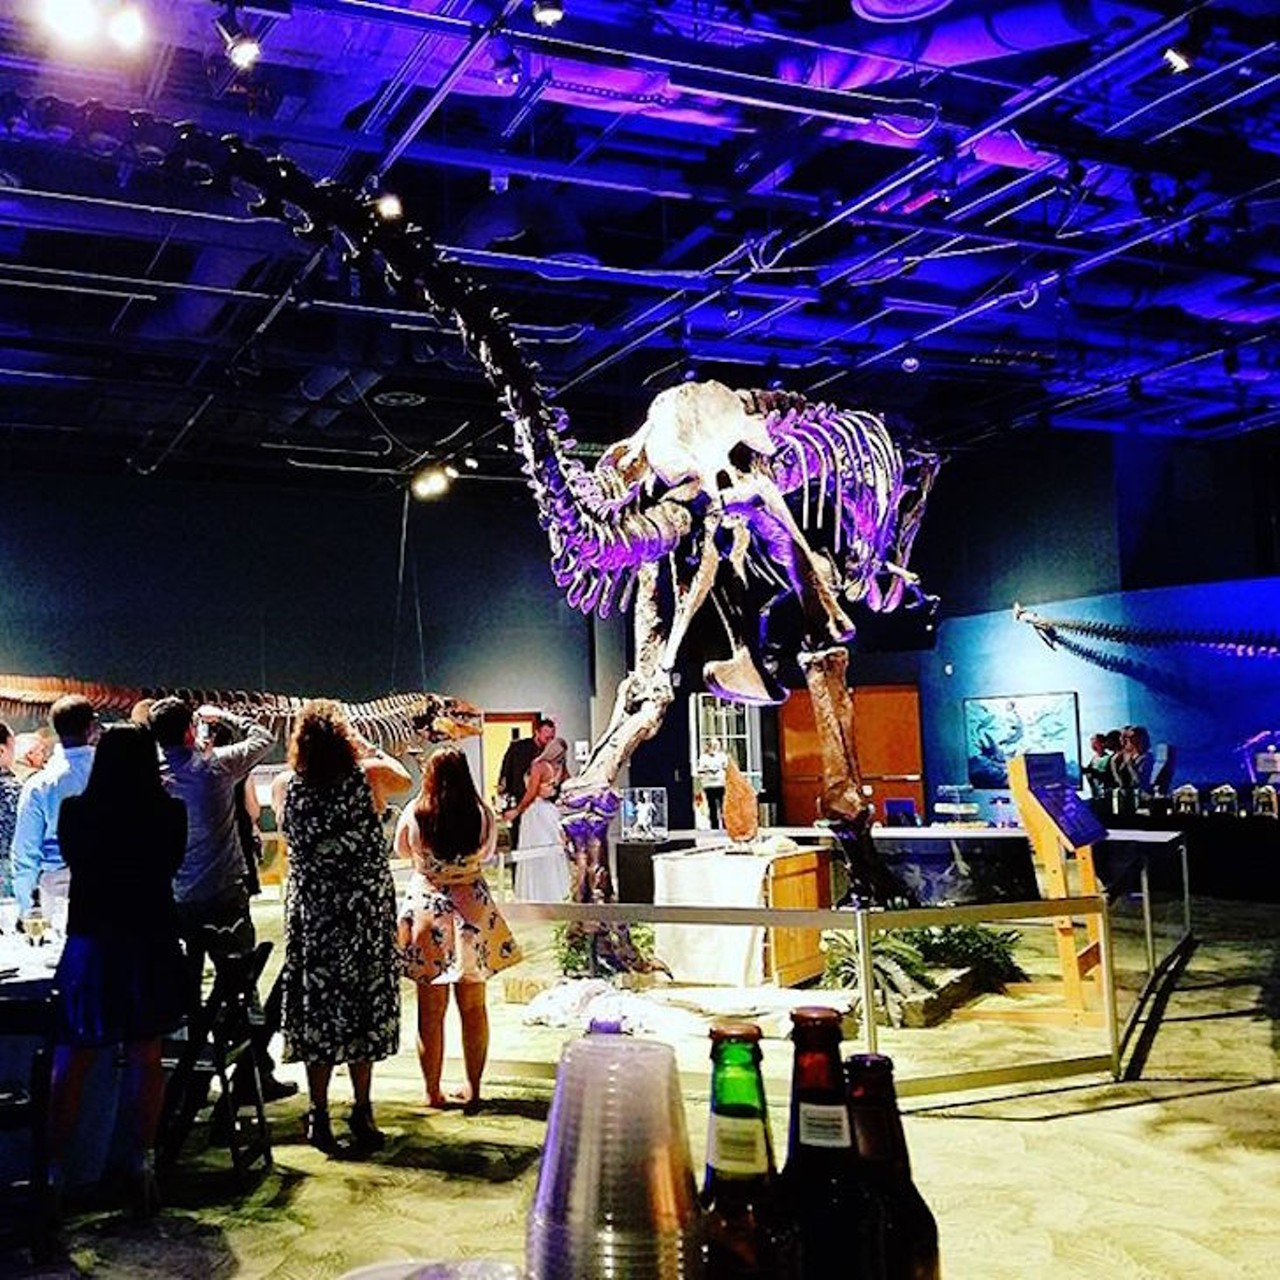 Orlando Science Center
This dinosaur might be forever alone, but you two definitely won't be.
777 E. Princeton St. | 407-514-2000
Photo via jessicapawli/Instagram